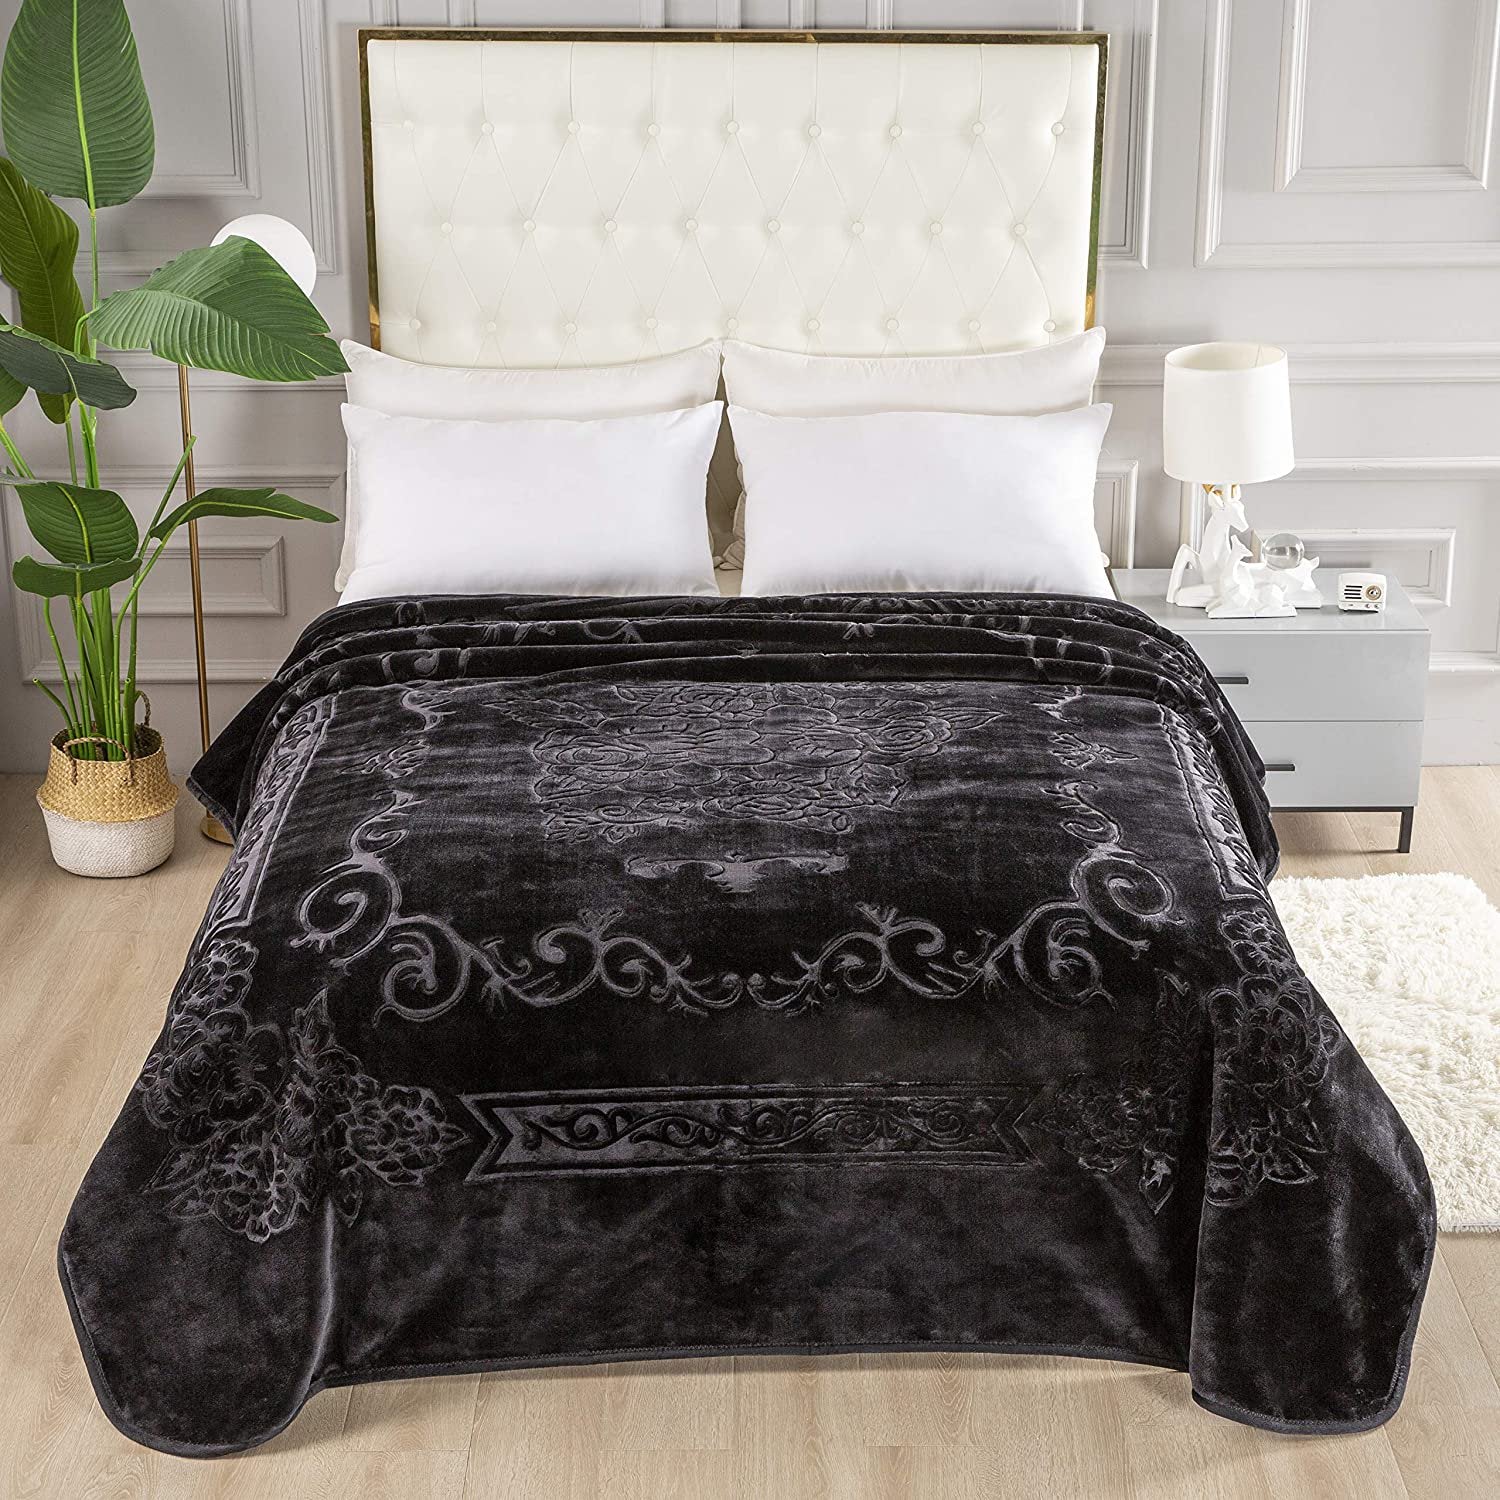 FLORAL EMBOSSING 1PLY WEIGHTED BLACK BLANKETS - SOLID COLOR DESIGN, WARM HEAVY BLANKET, JUMBO SIZE